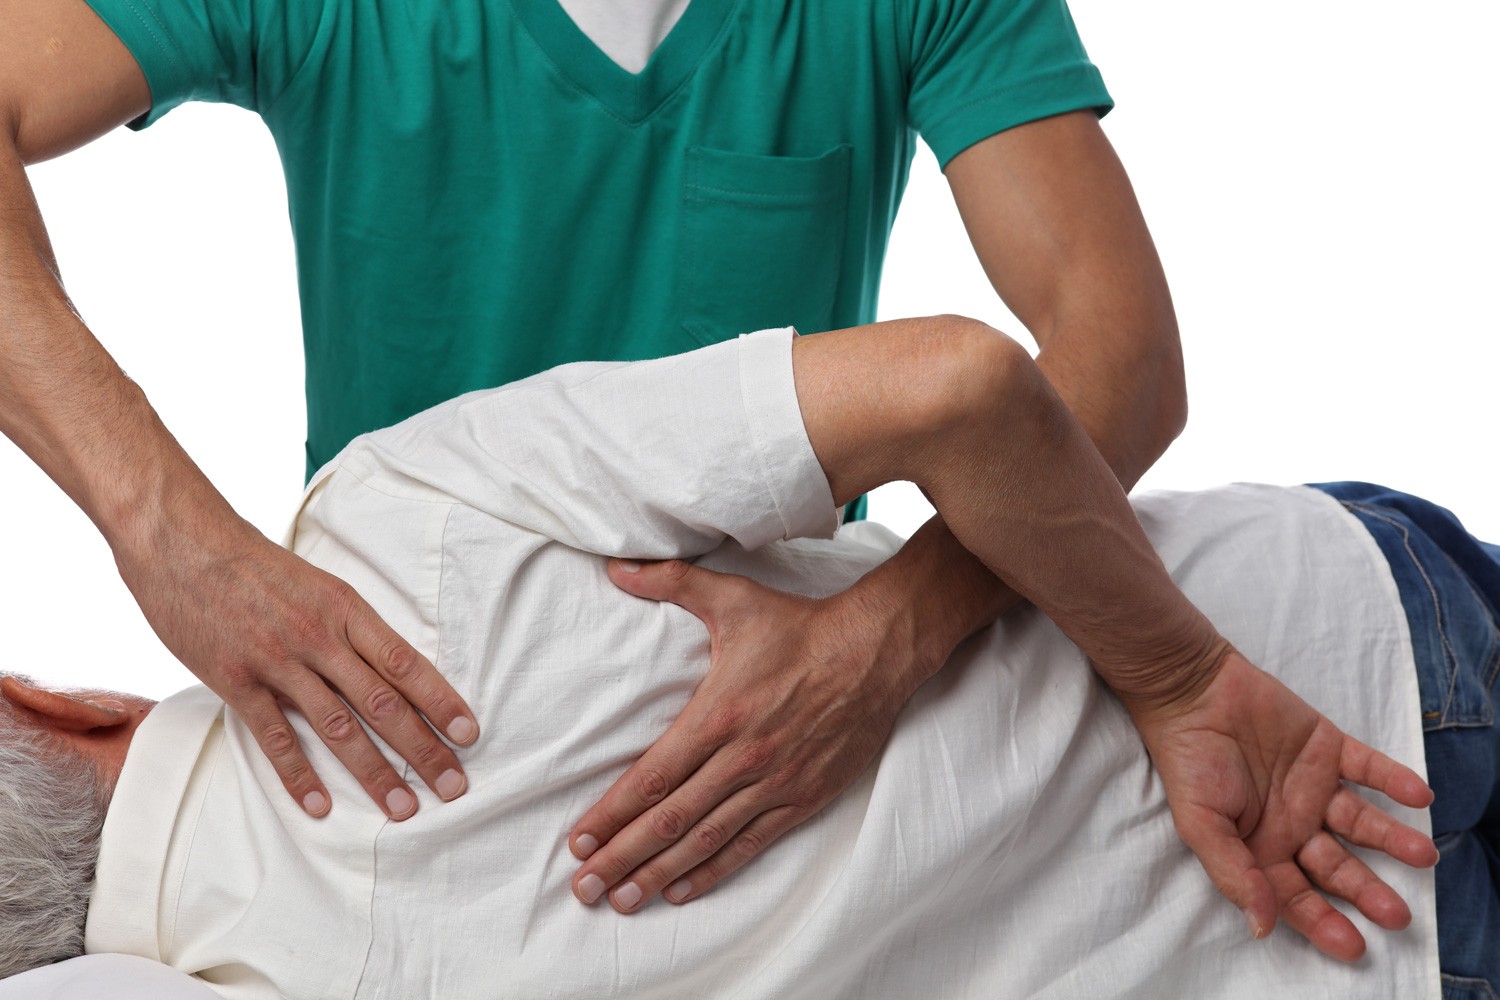 Physiotherapy at home is the missing link of treatment